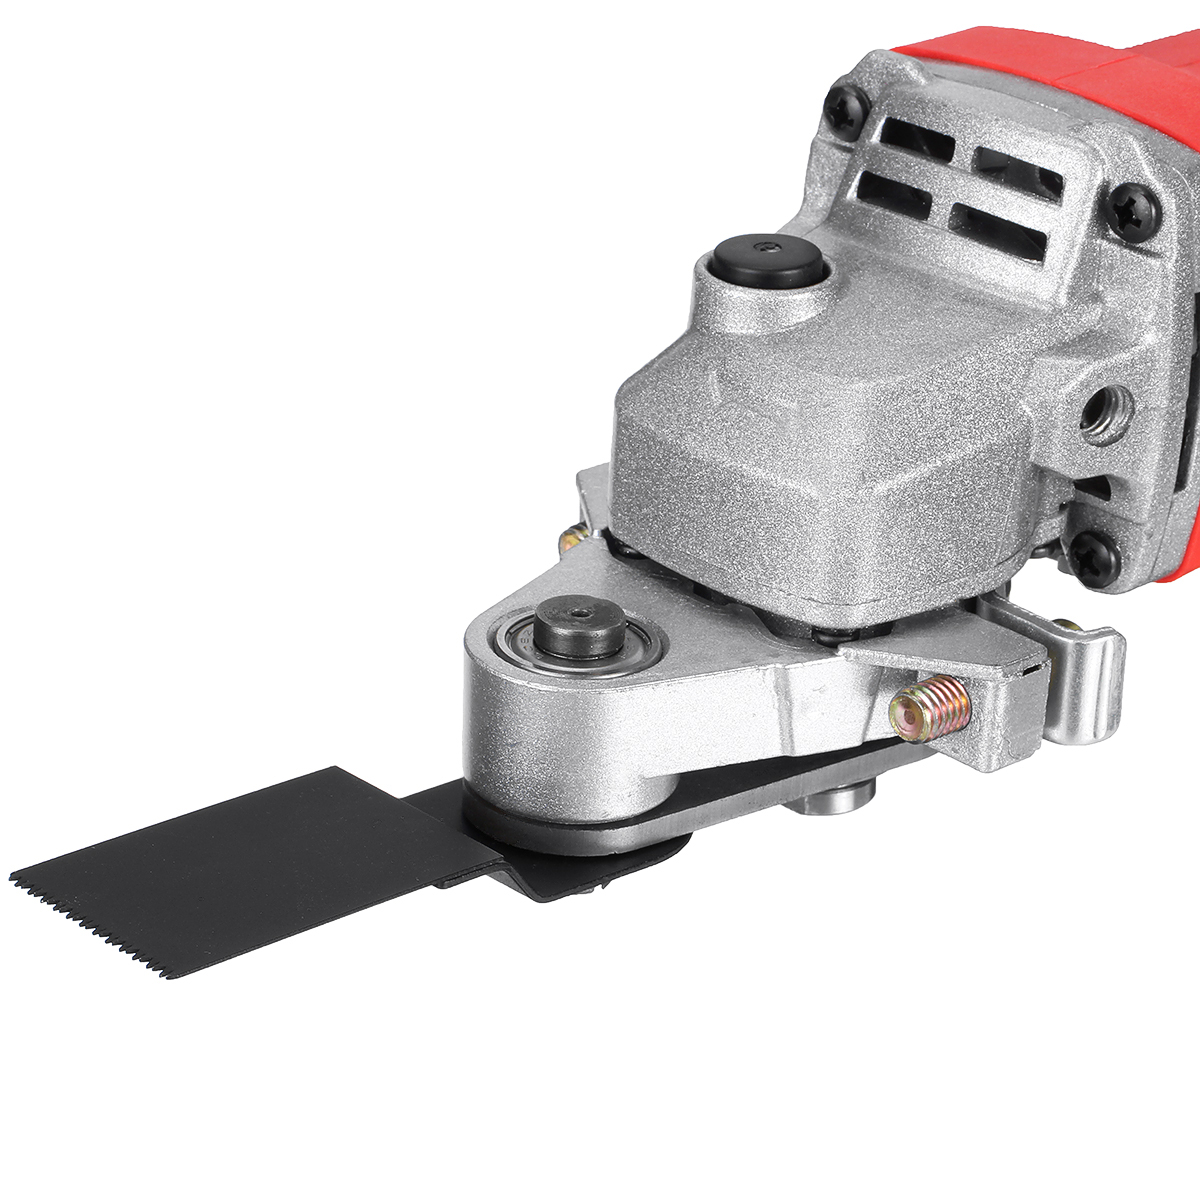 Oscillating-Multi-Saw-Attachment-Adapter-Change-Angle-Grinder-into-Trimming-Machine-Oscillating-Tool-1846644-13